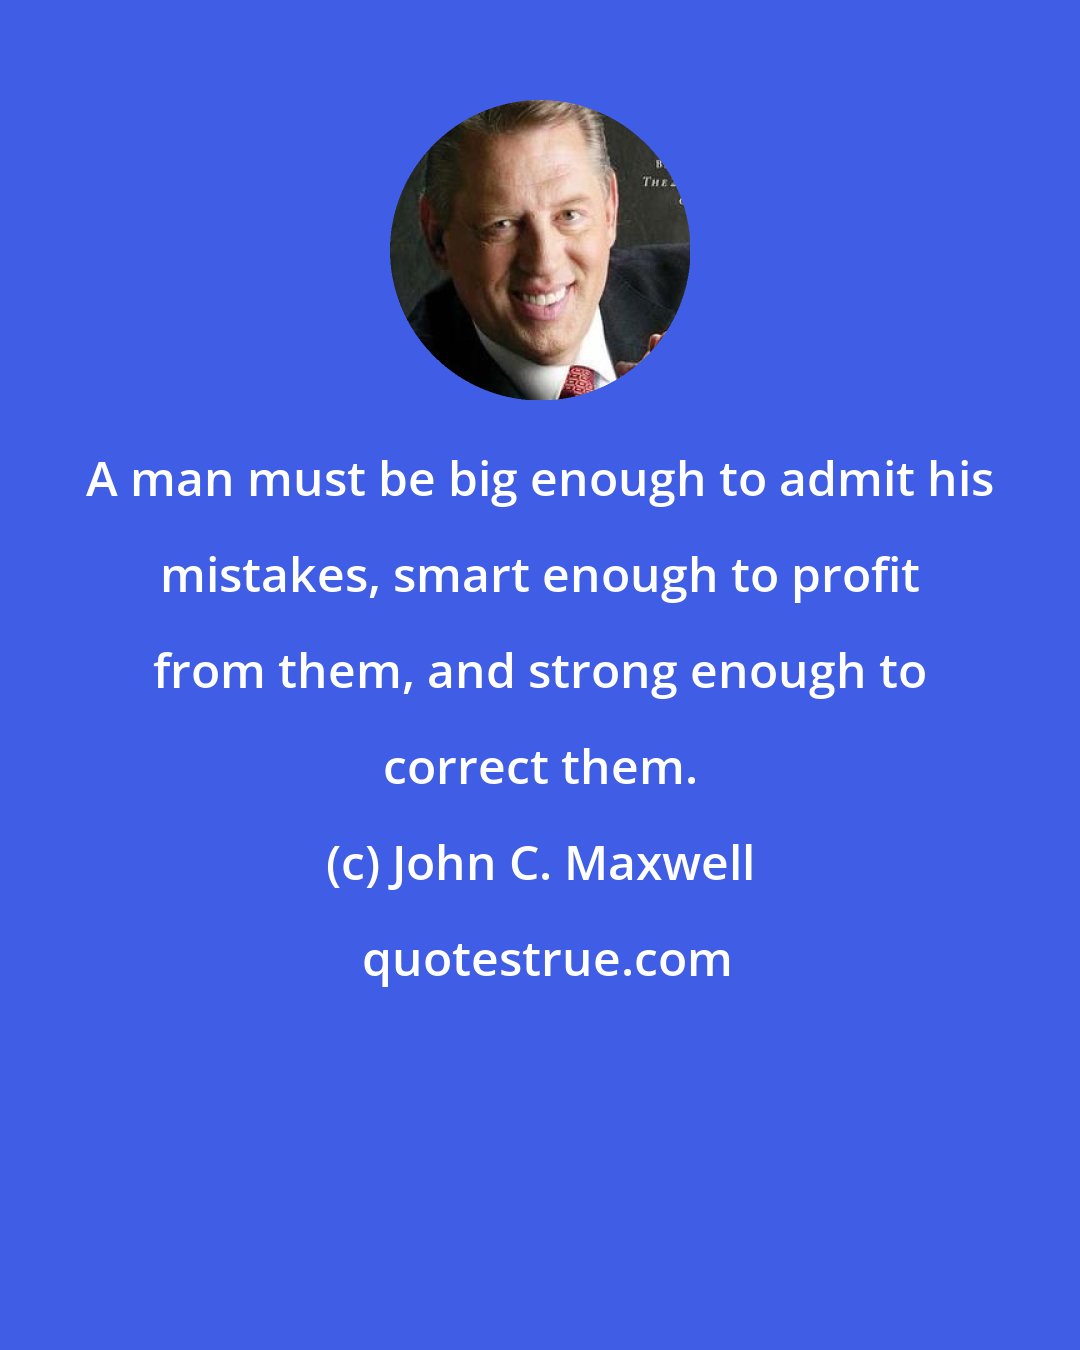 John C. Maxwell: A man must be big enough to admit his mistakes, smart enough to profit from them, and strong enough to correct them.